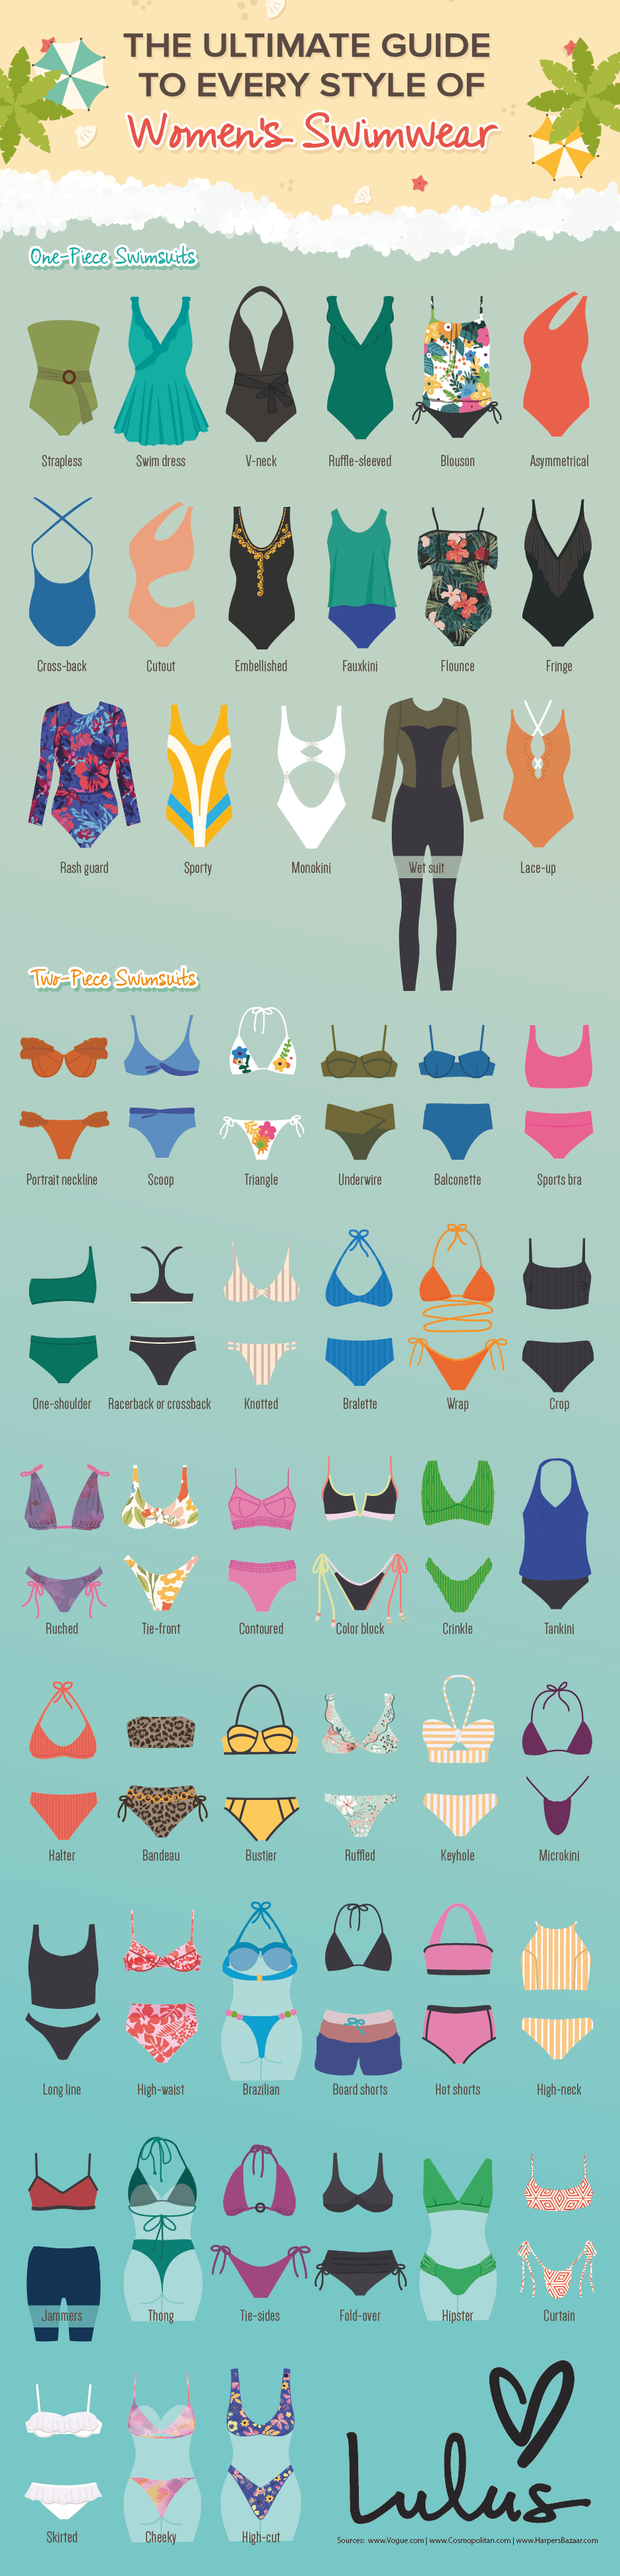 Tips & Tricks to Shop for Tankini Bathing Suits